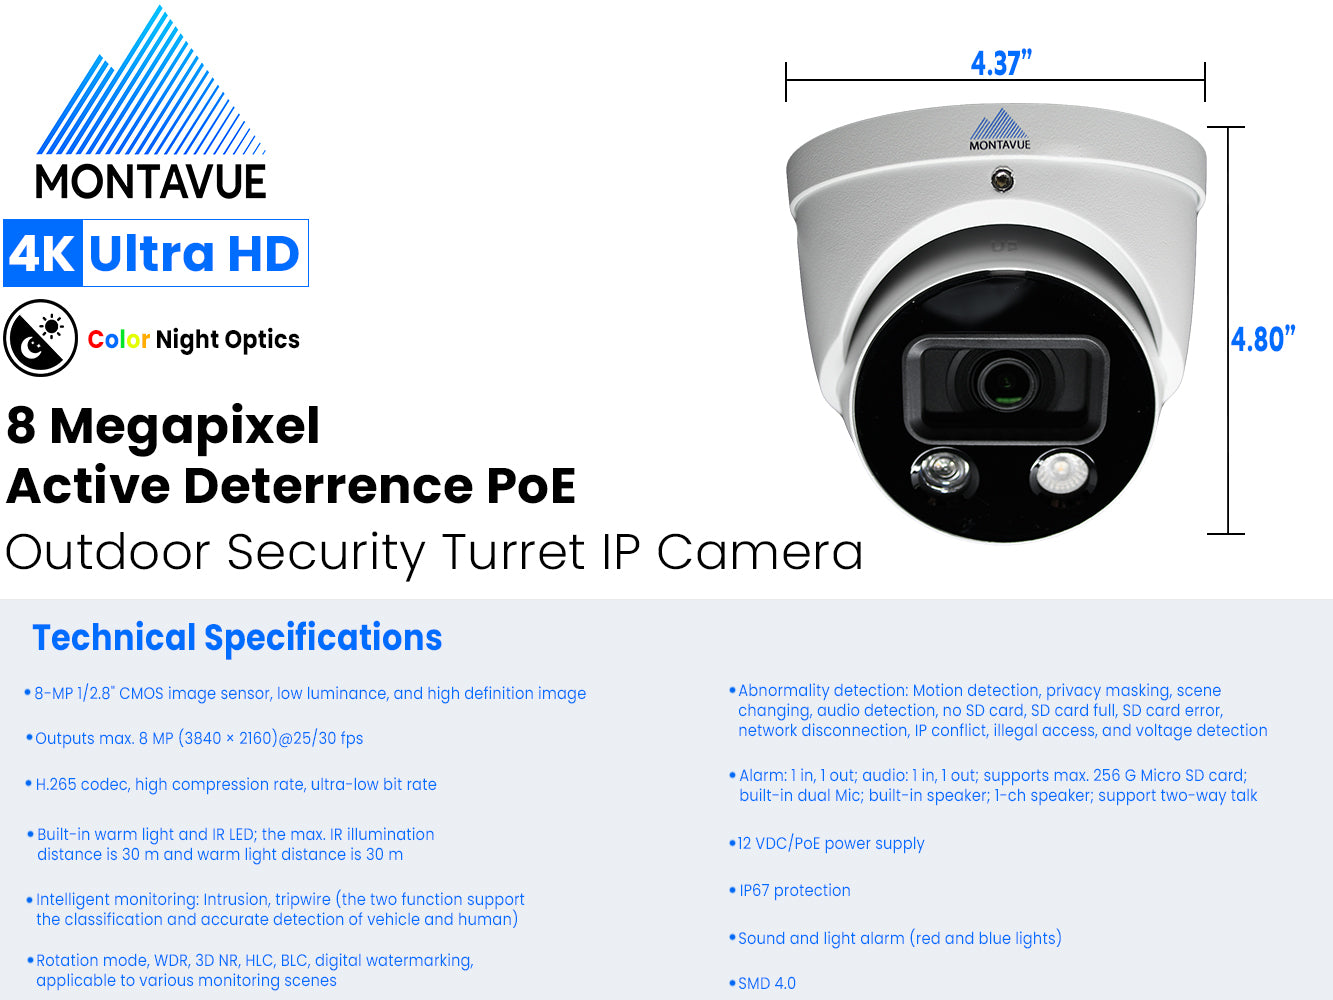 MTT8106 | 8MP 4K Turret Security Camera with Active Deterrence and SMD 4.0 - Montavue